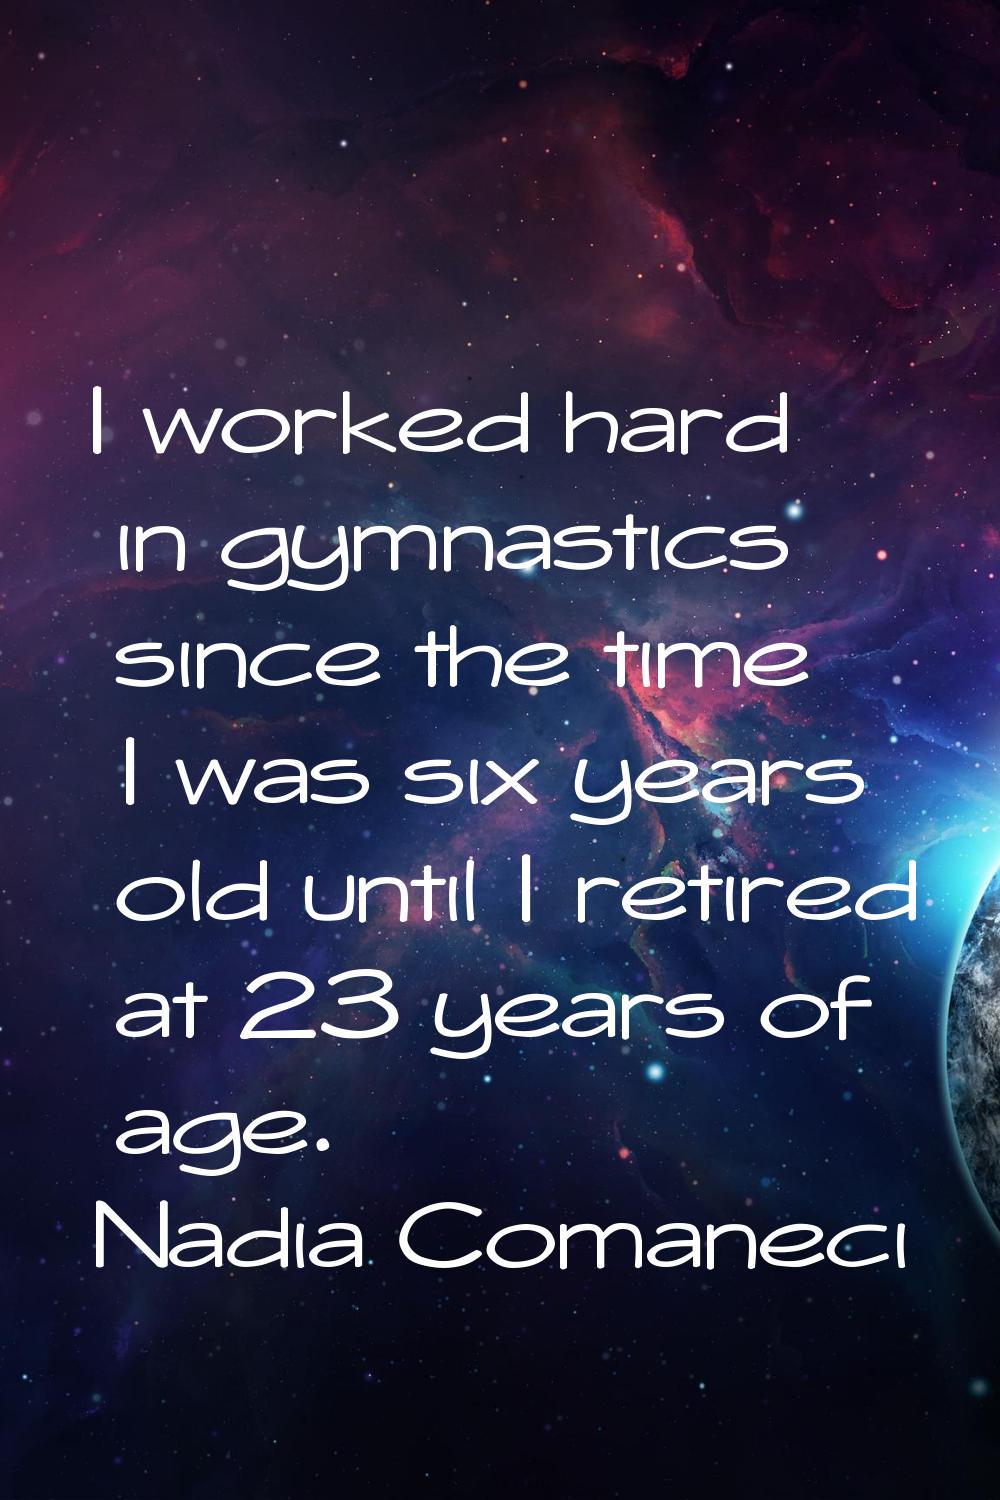 I worked hard in gymnastics since the time I was six years old until I retired at 23 years of age.